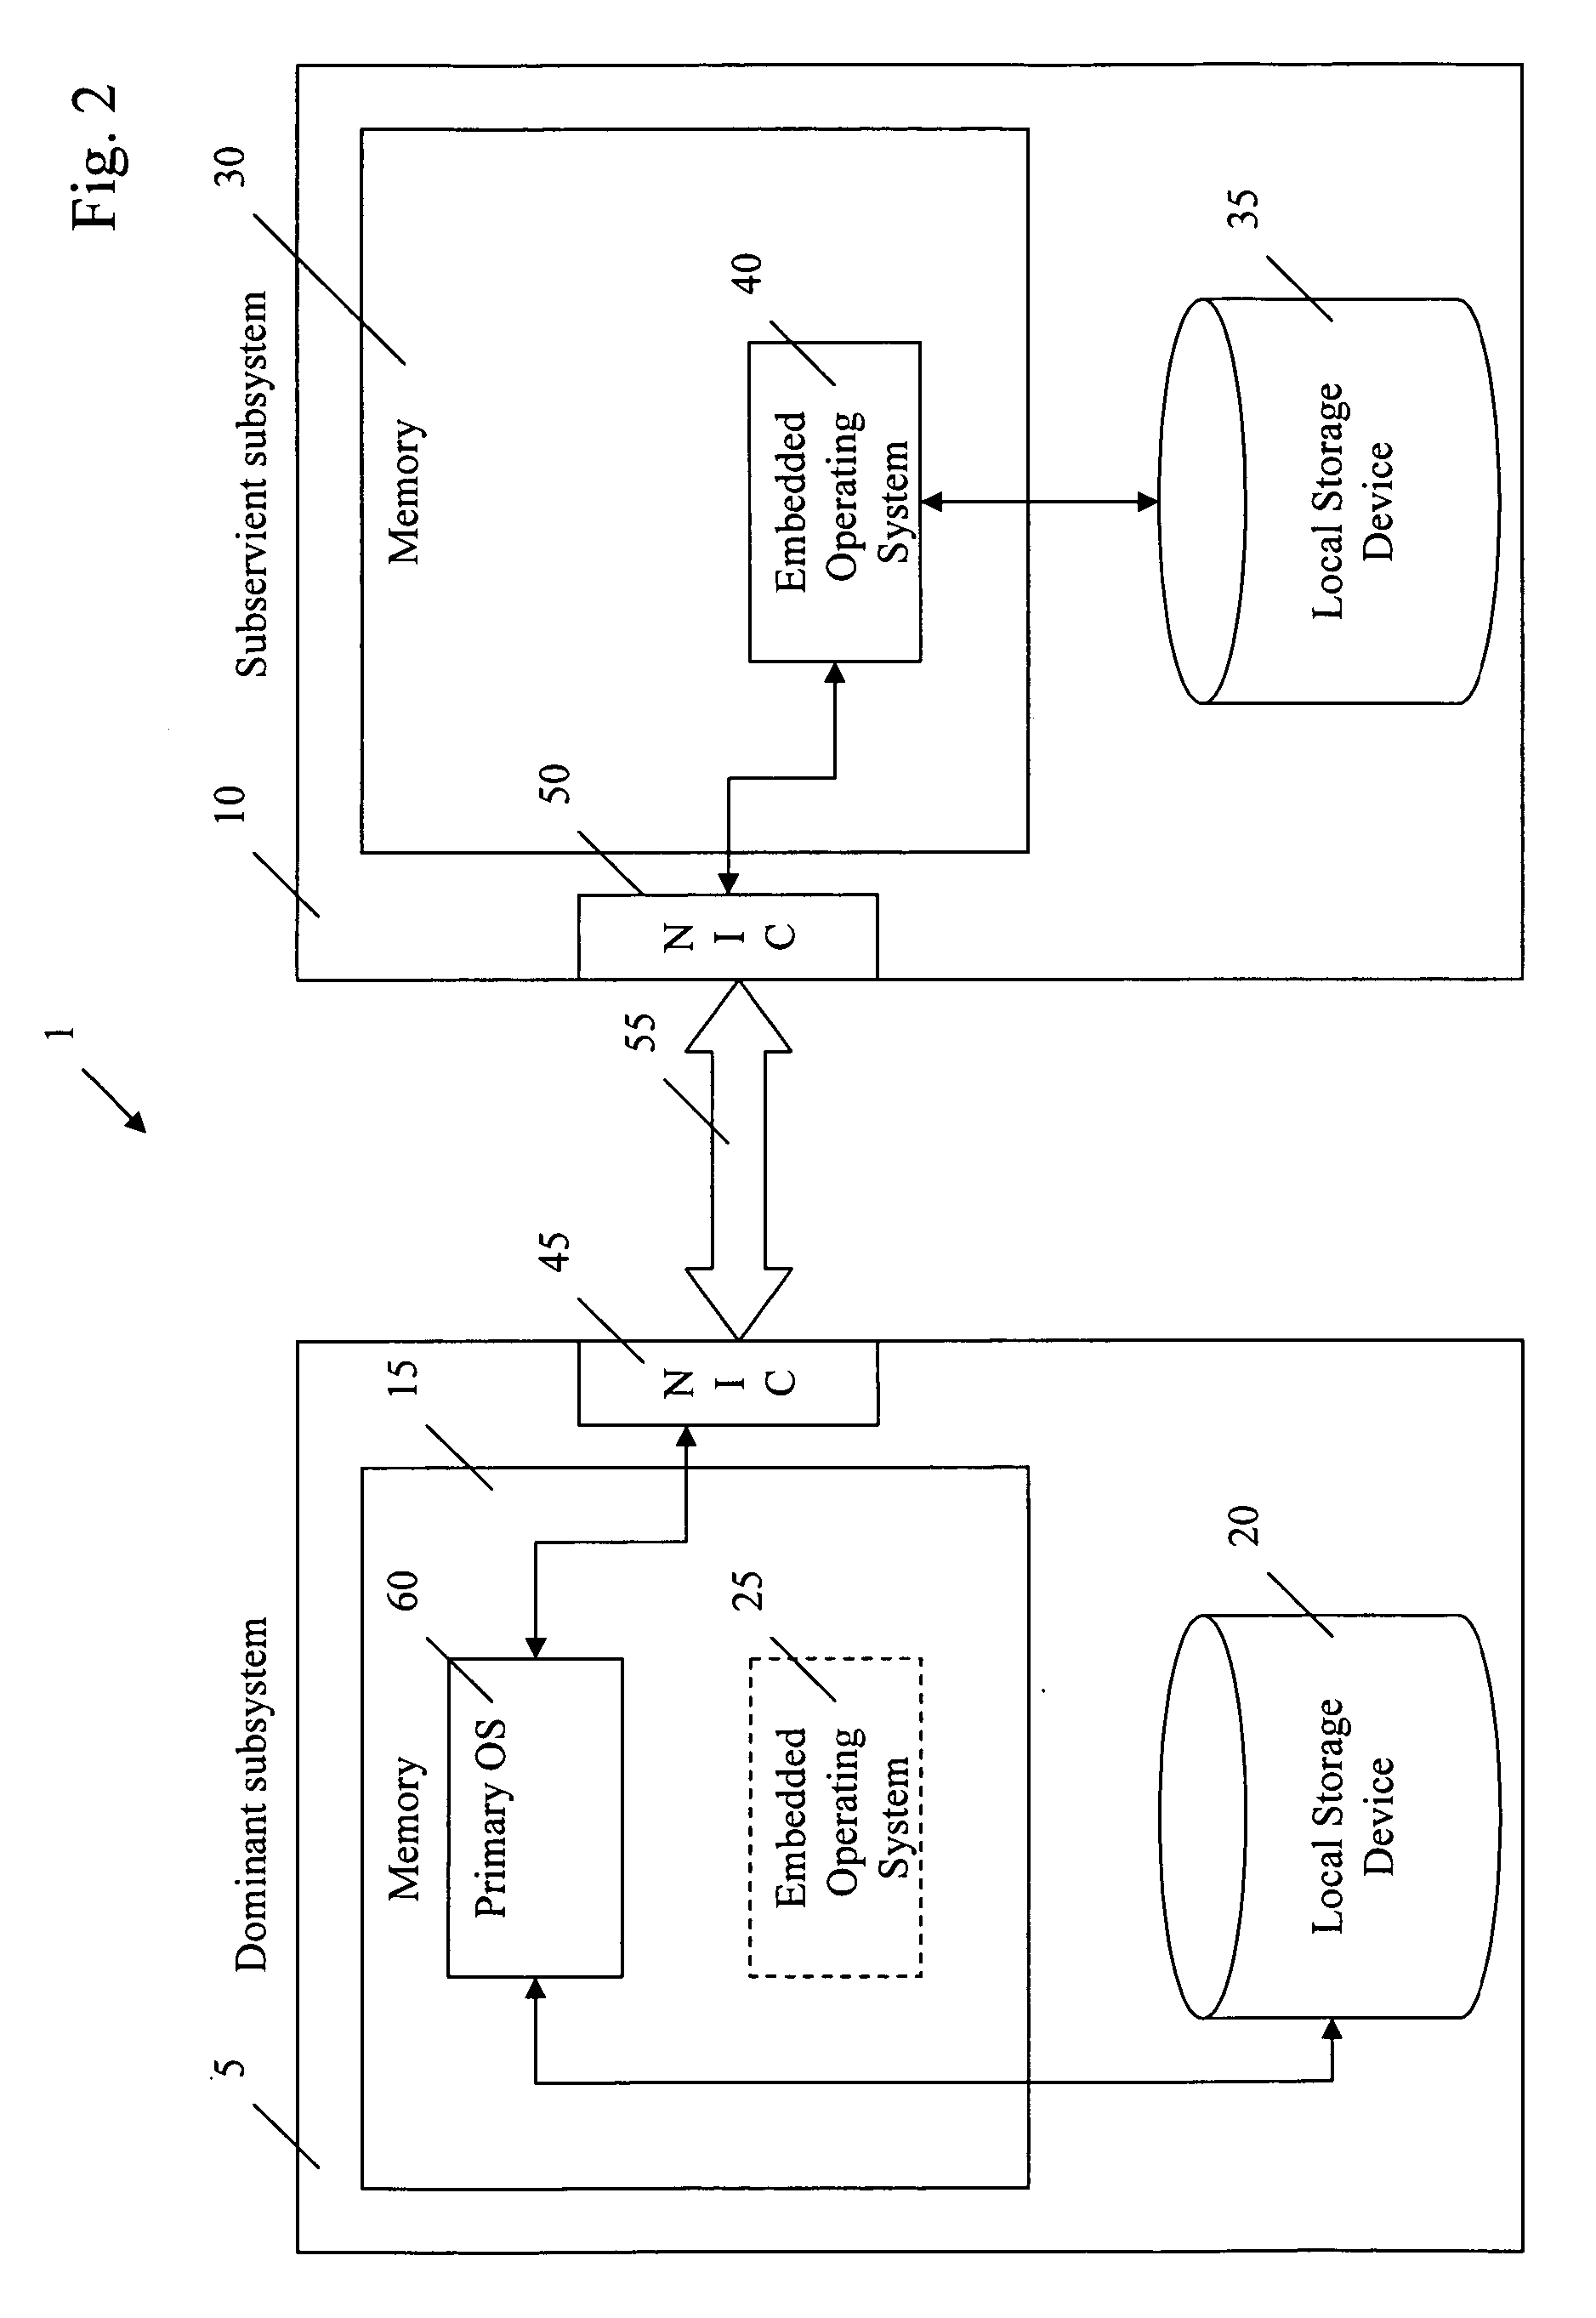 Systems and methods for ensuring high availability